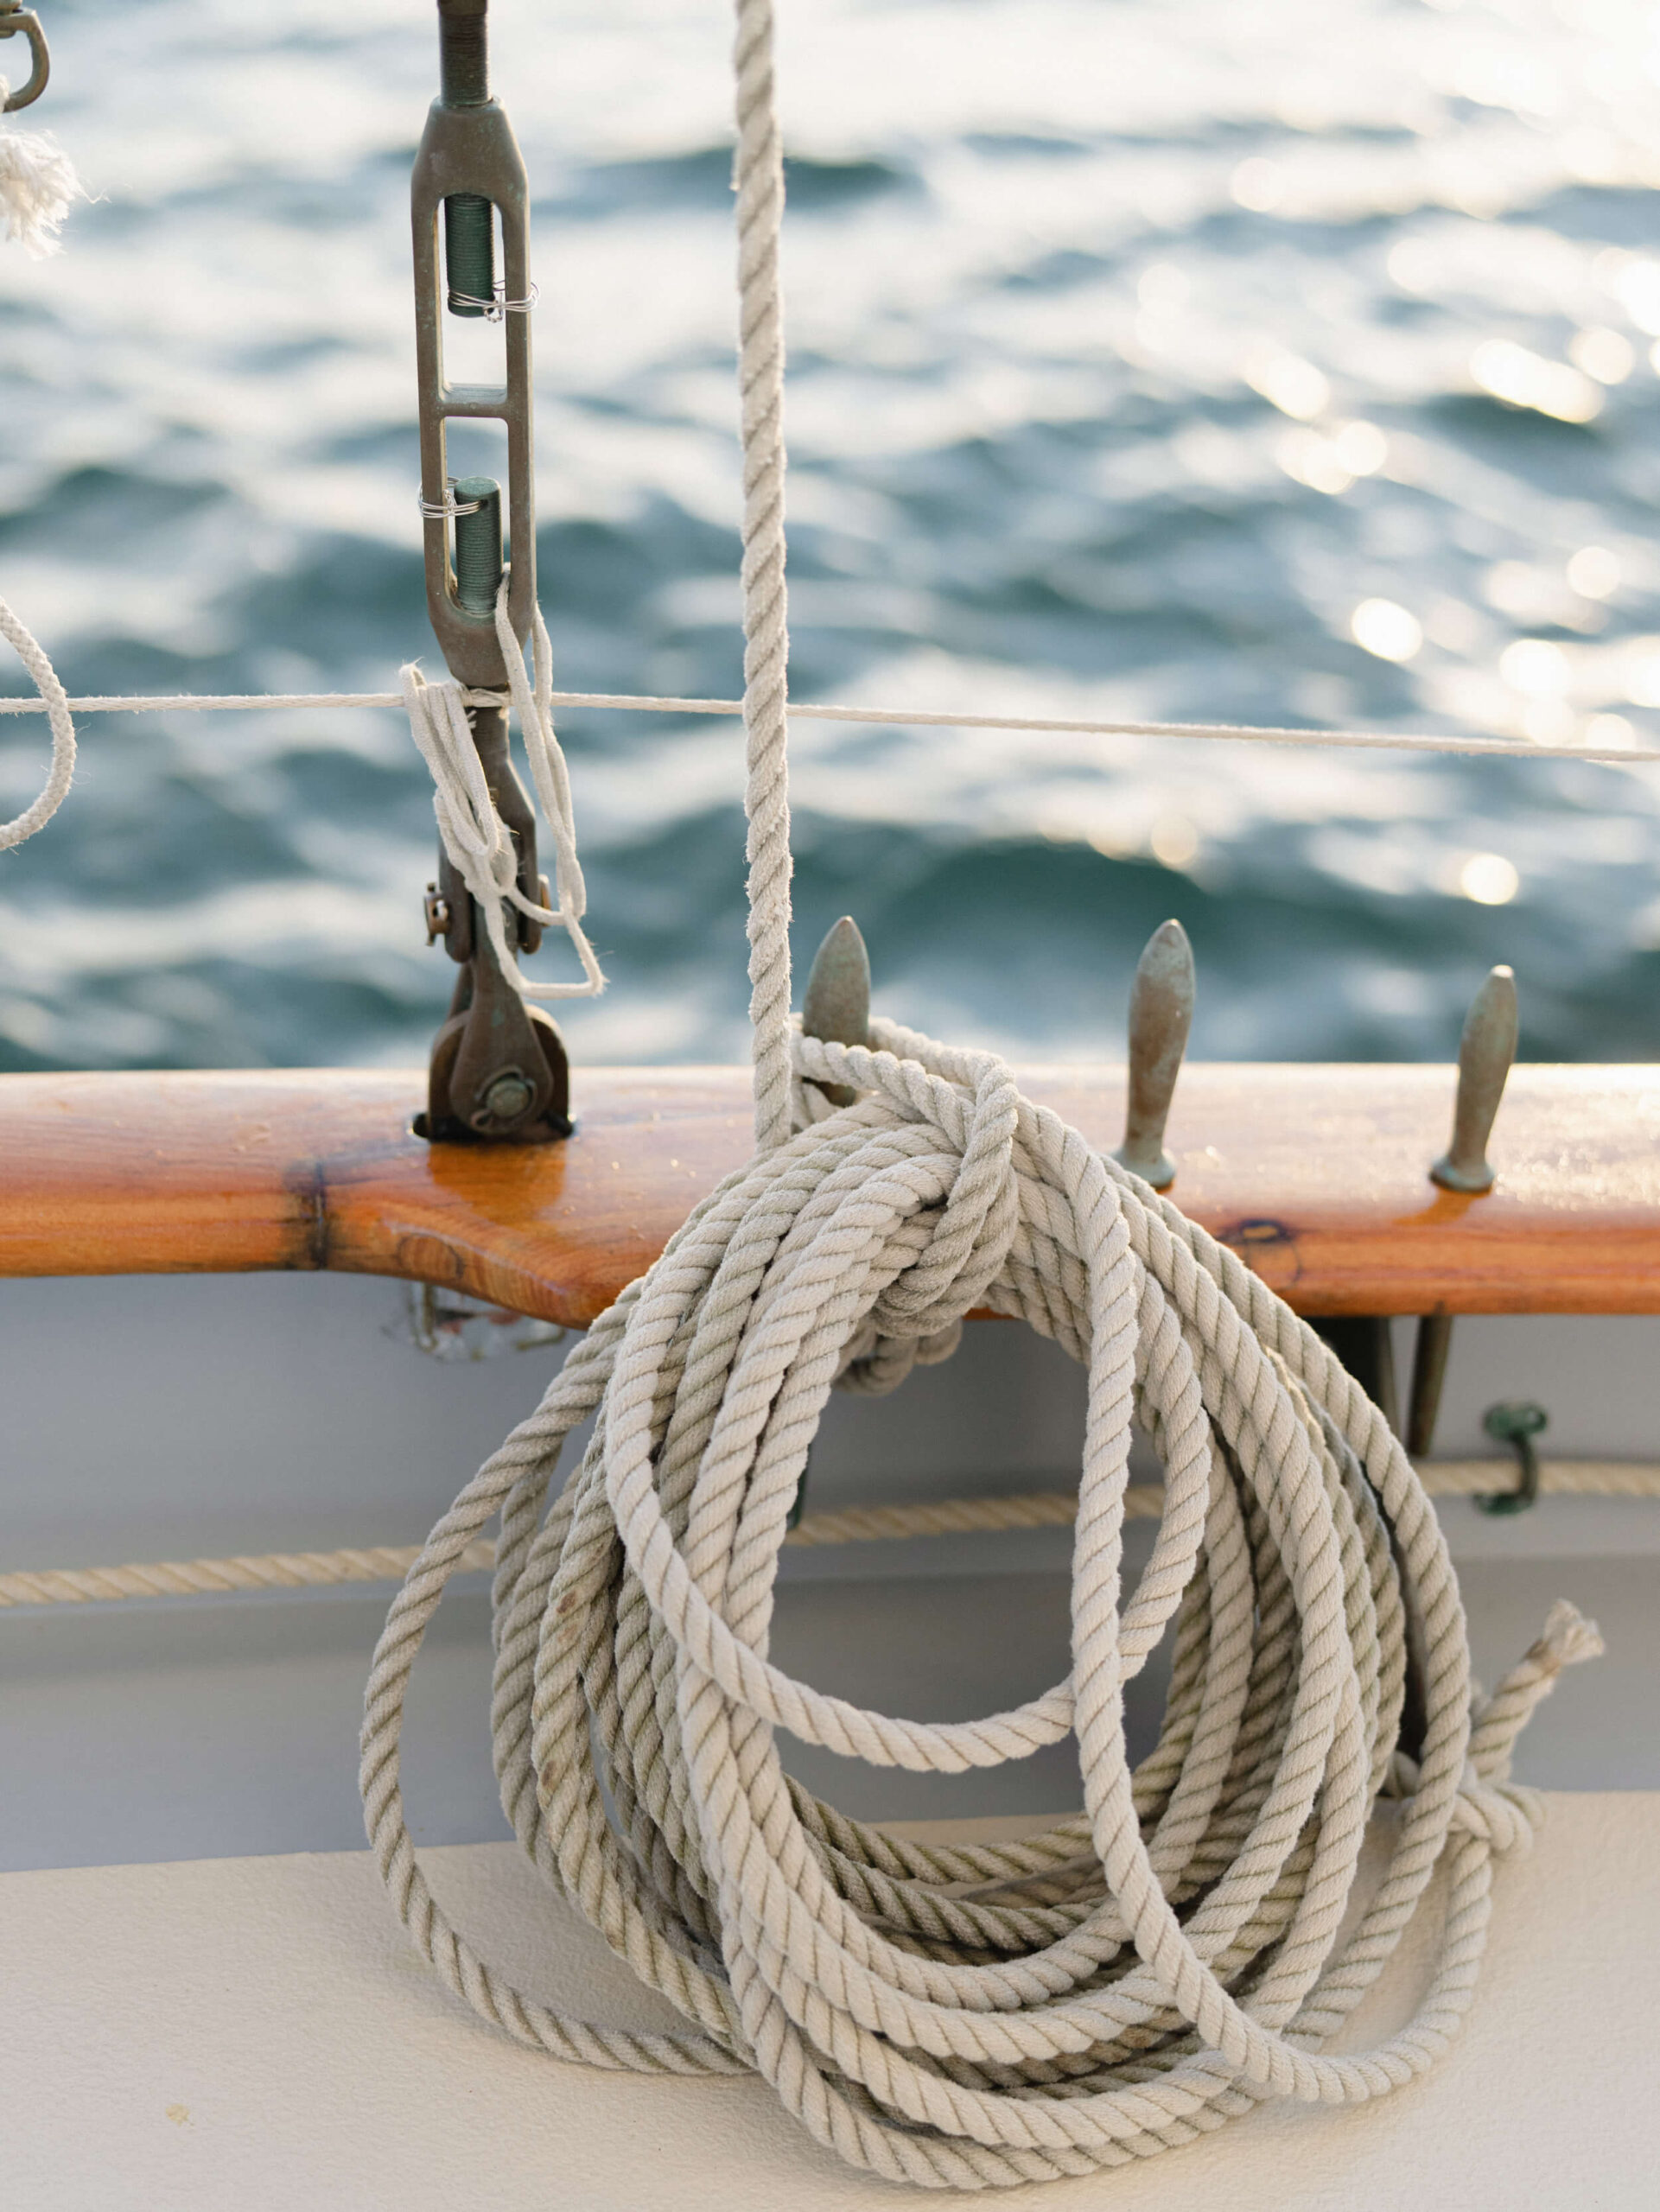 Rope details on a sailboat